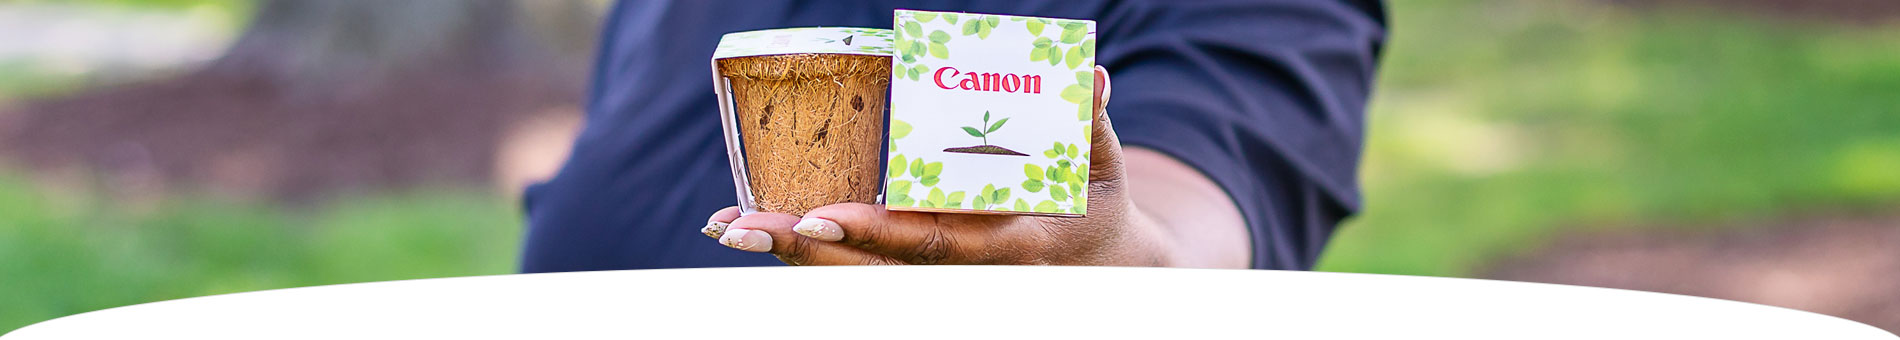 Imaghe of hands holding a note with the Canon logo and images of leaves